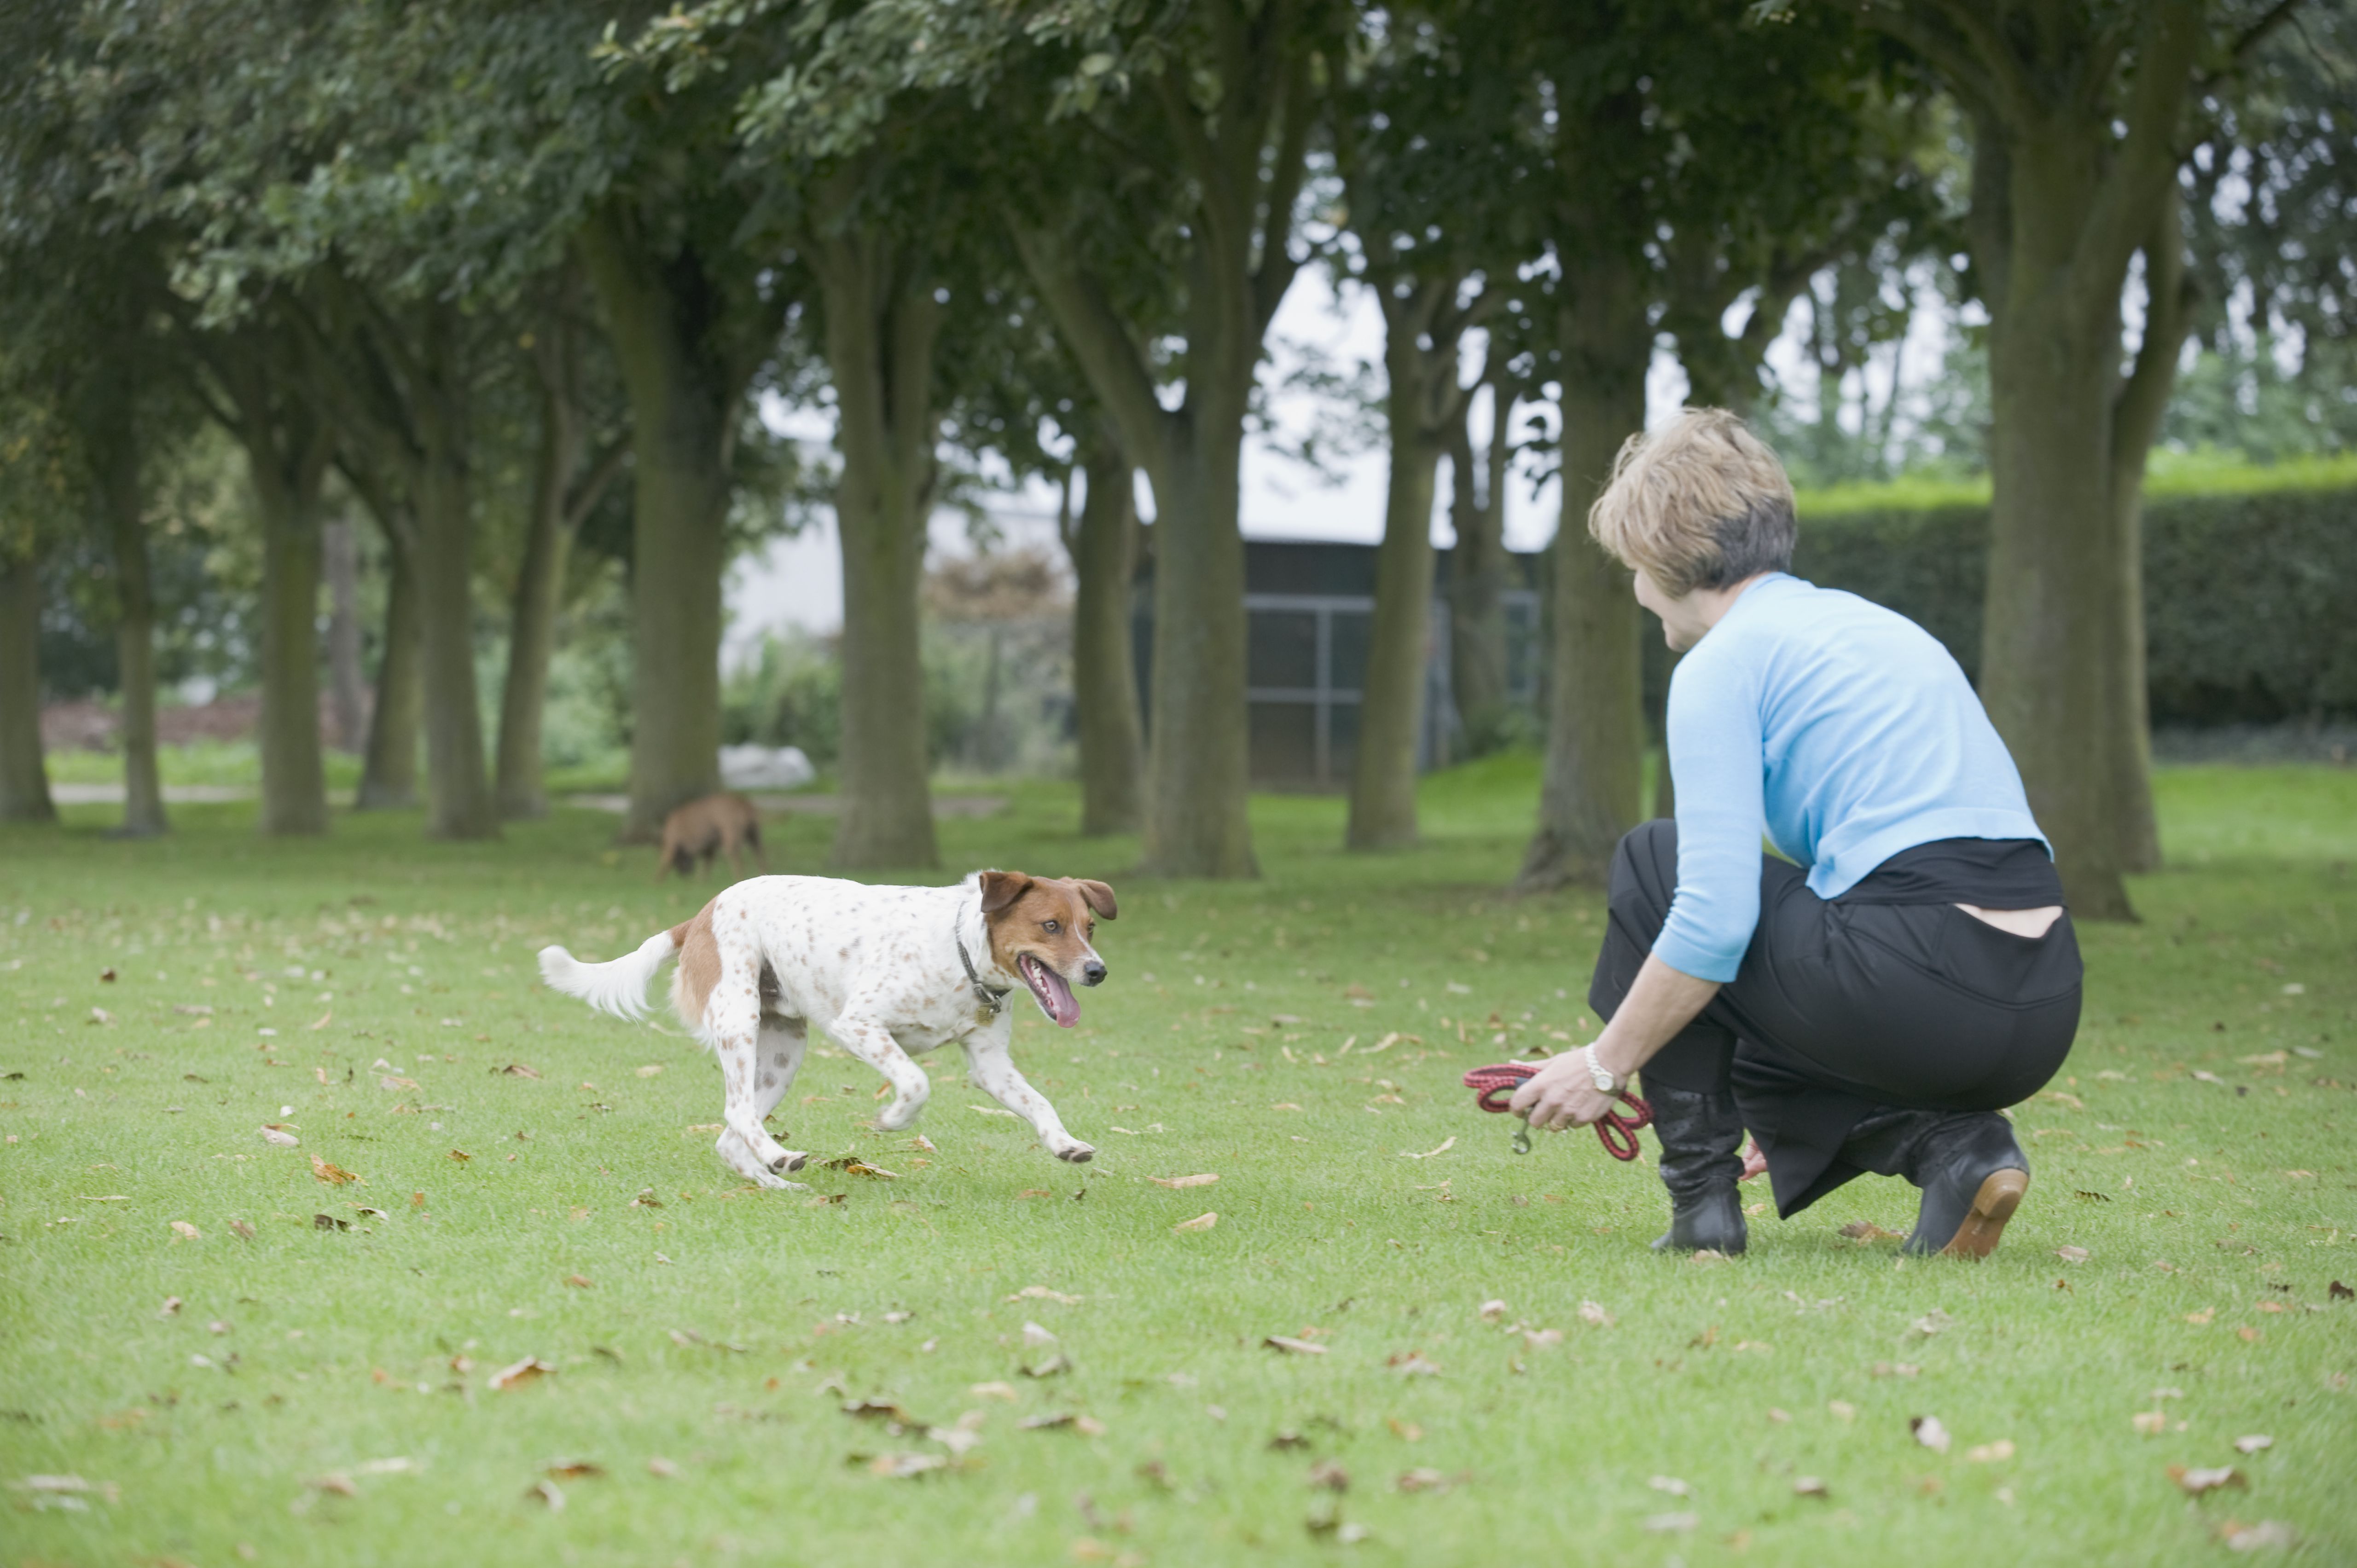 Mongrel dog running toward a woman crouching on grass holding a lead.